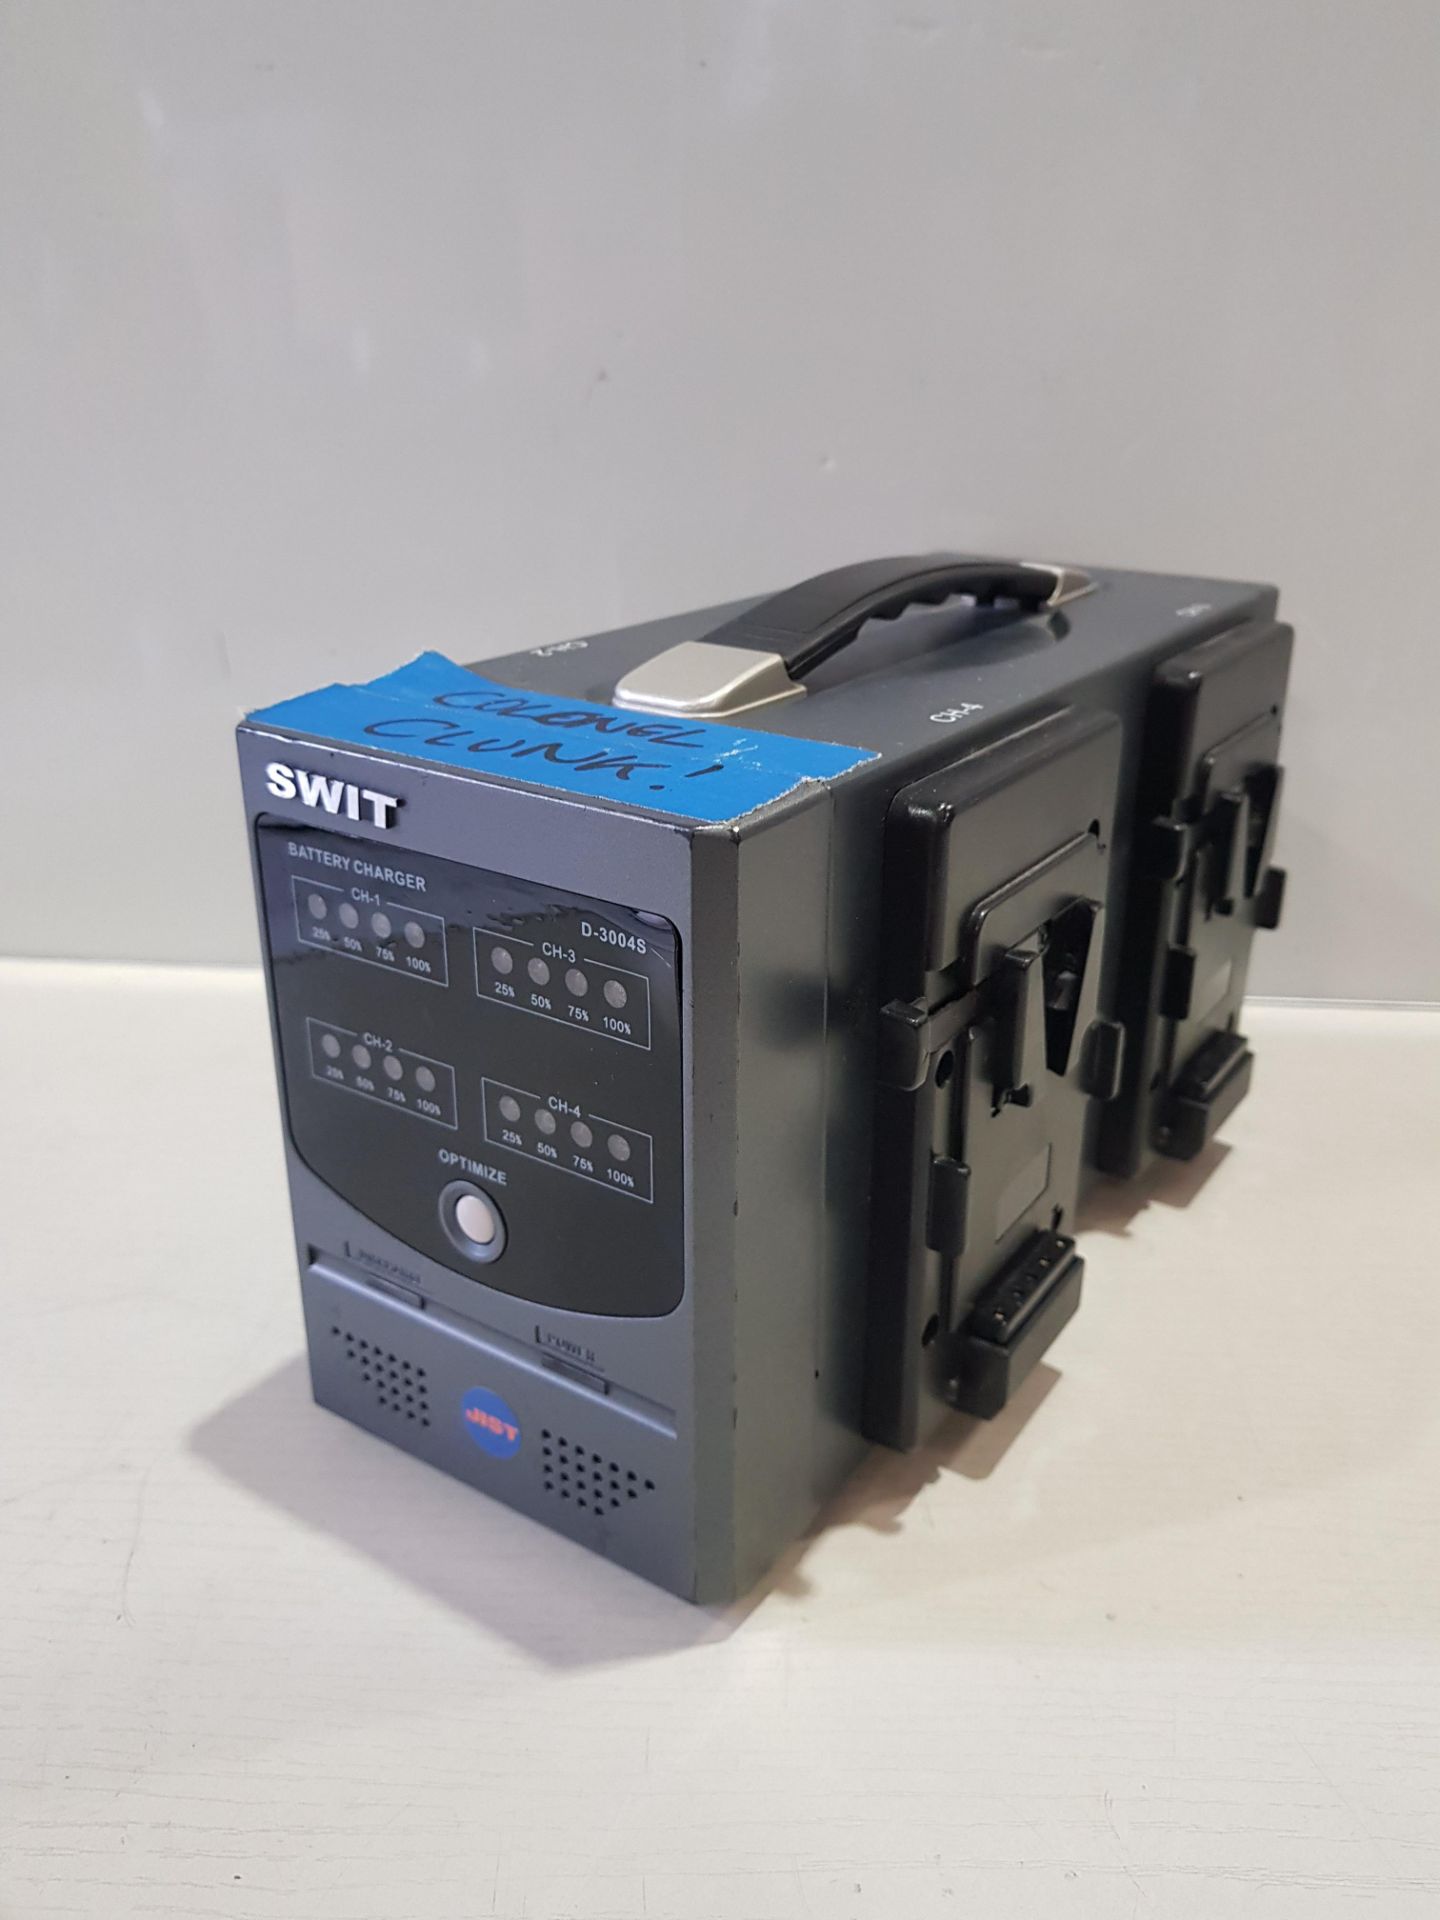 SWIT D-3004S 4-CHANNEL SIMULTANEOUS CHARGER FOR V-MOUNT BATTERIES BATTERY CHARGER - Image 2 of 2